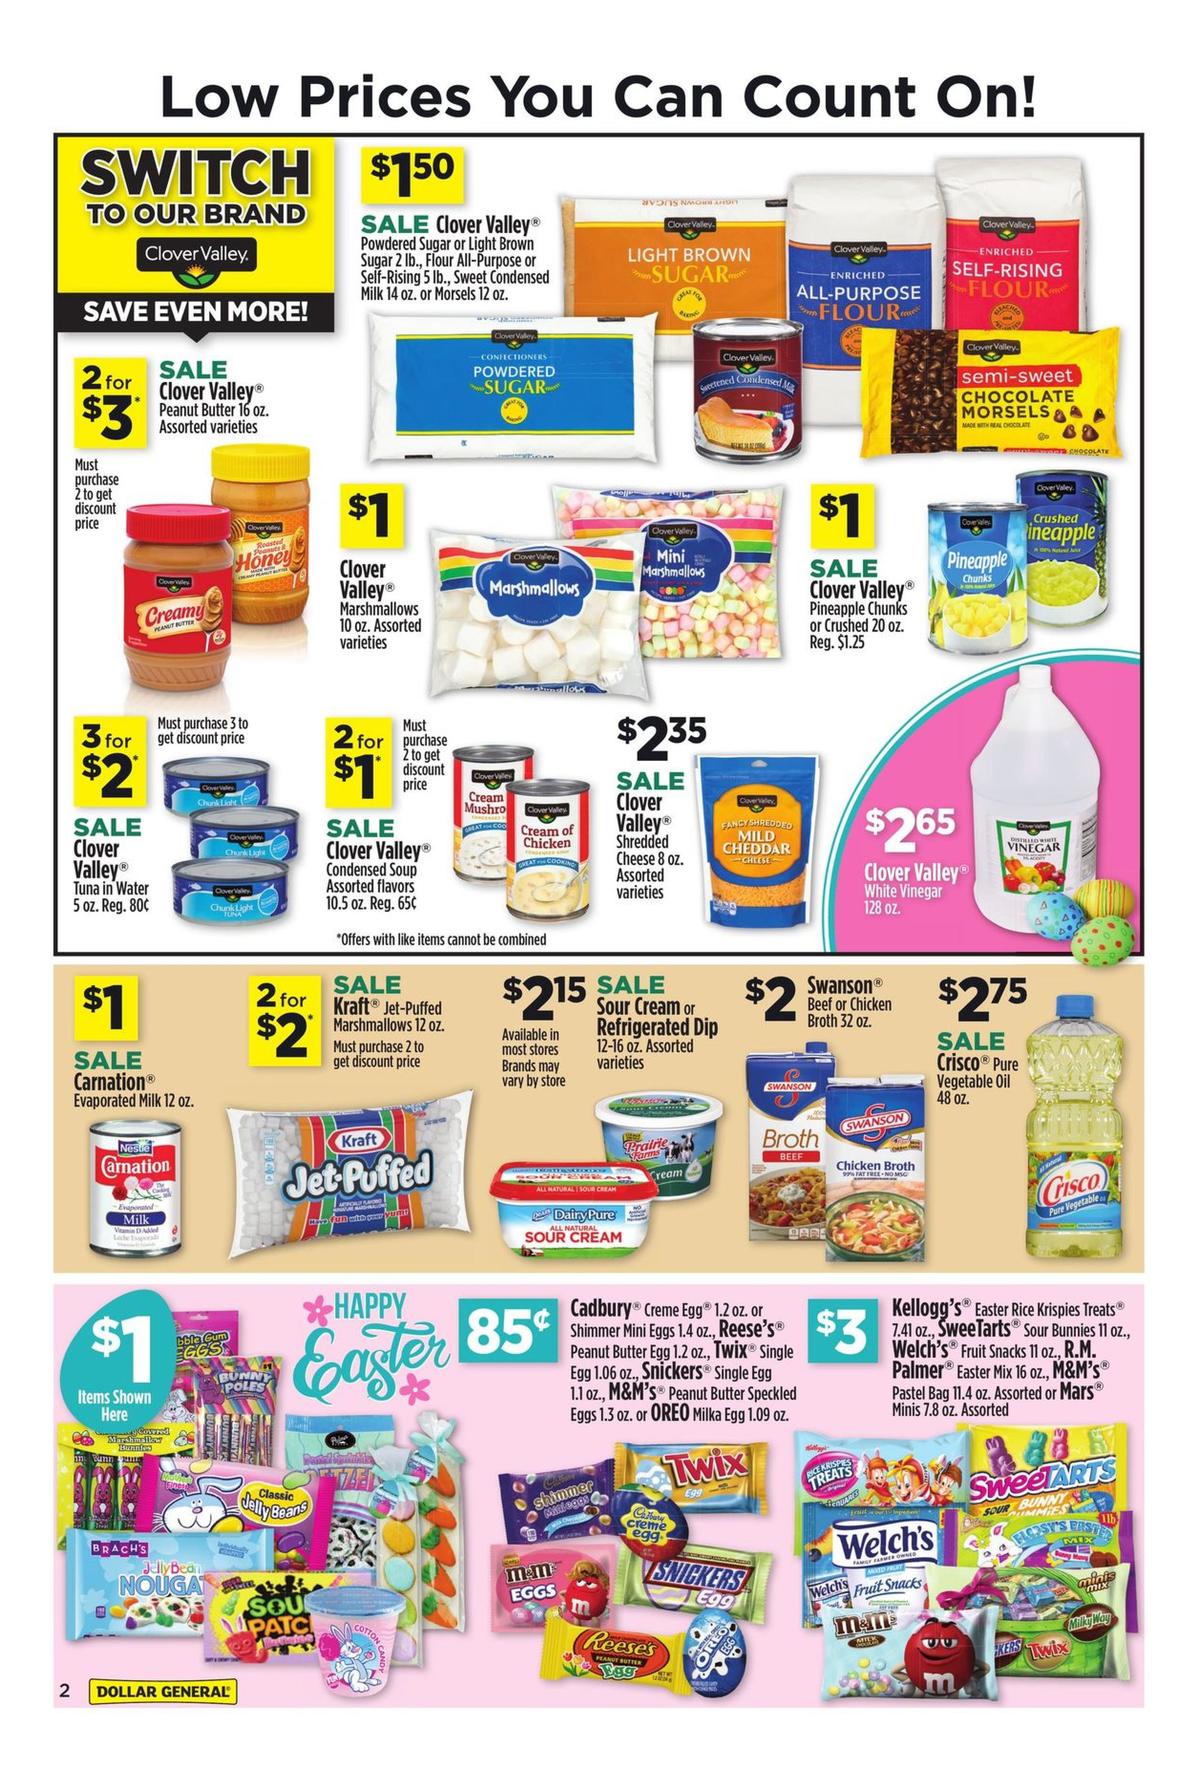 Dollar General Weekly Ad from March 17